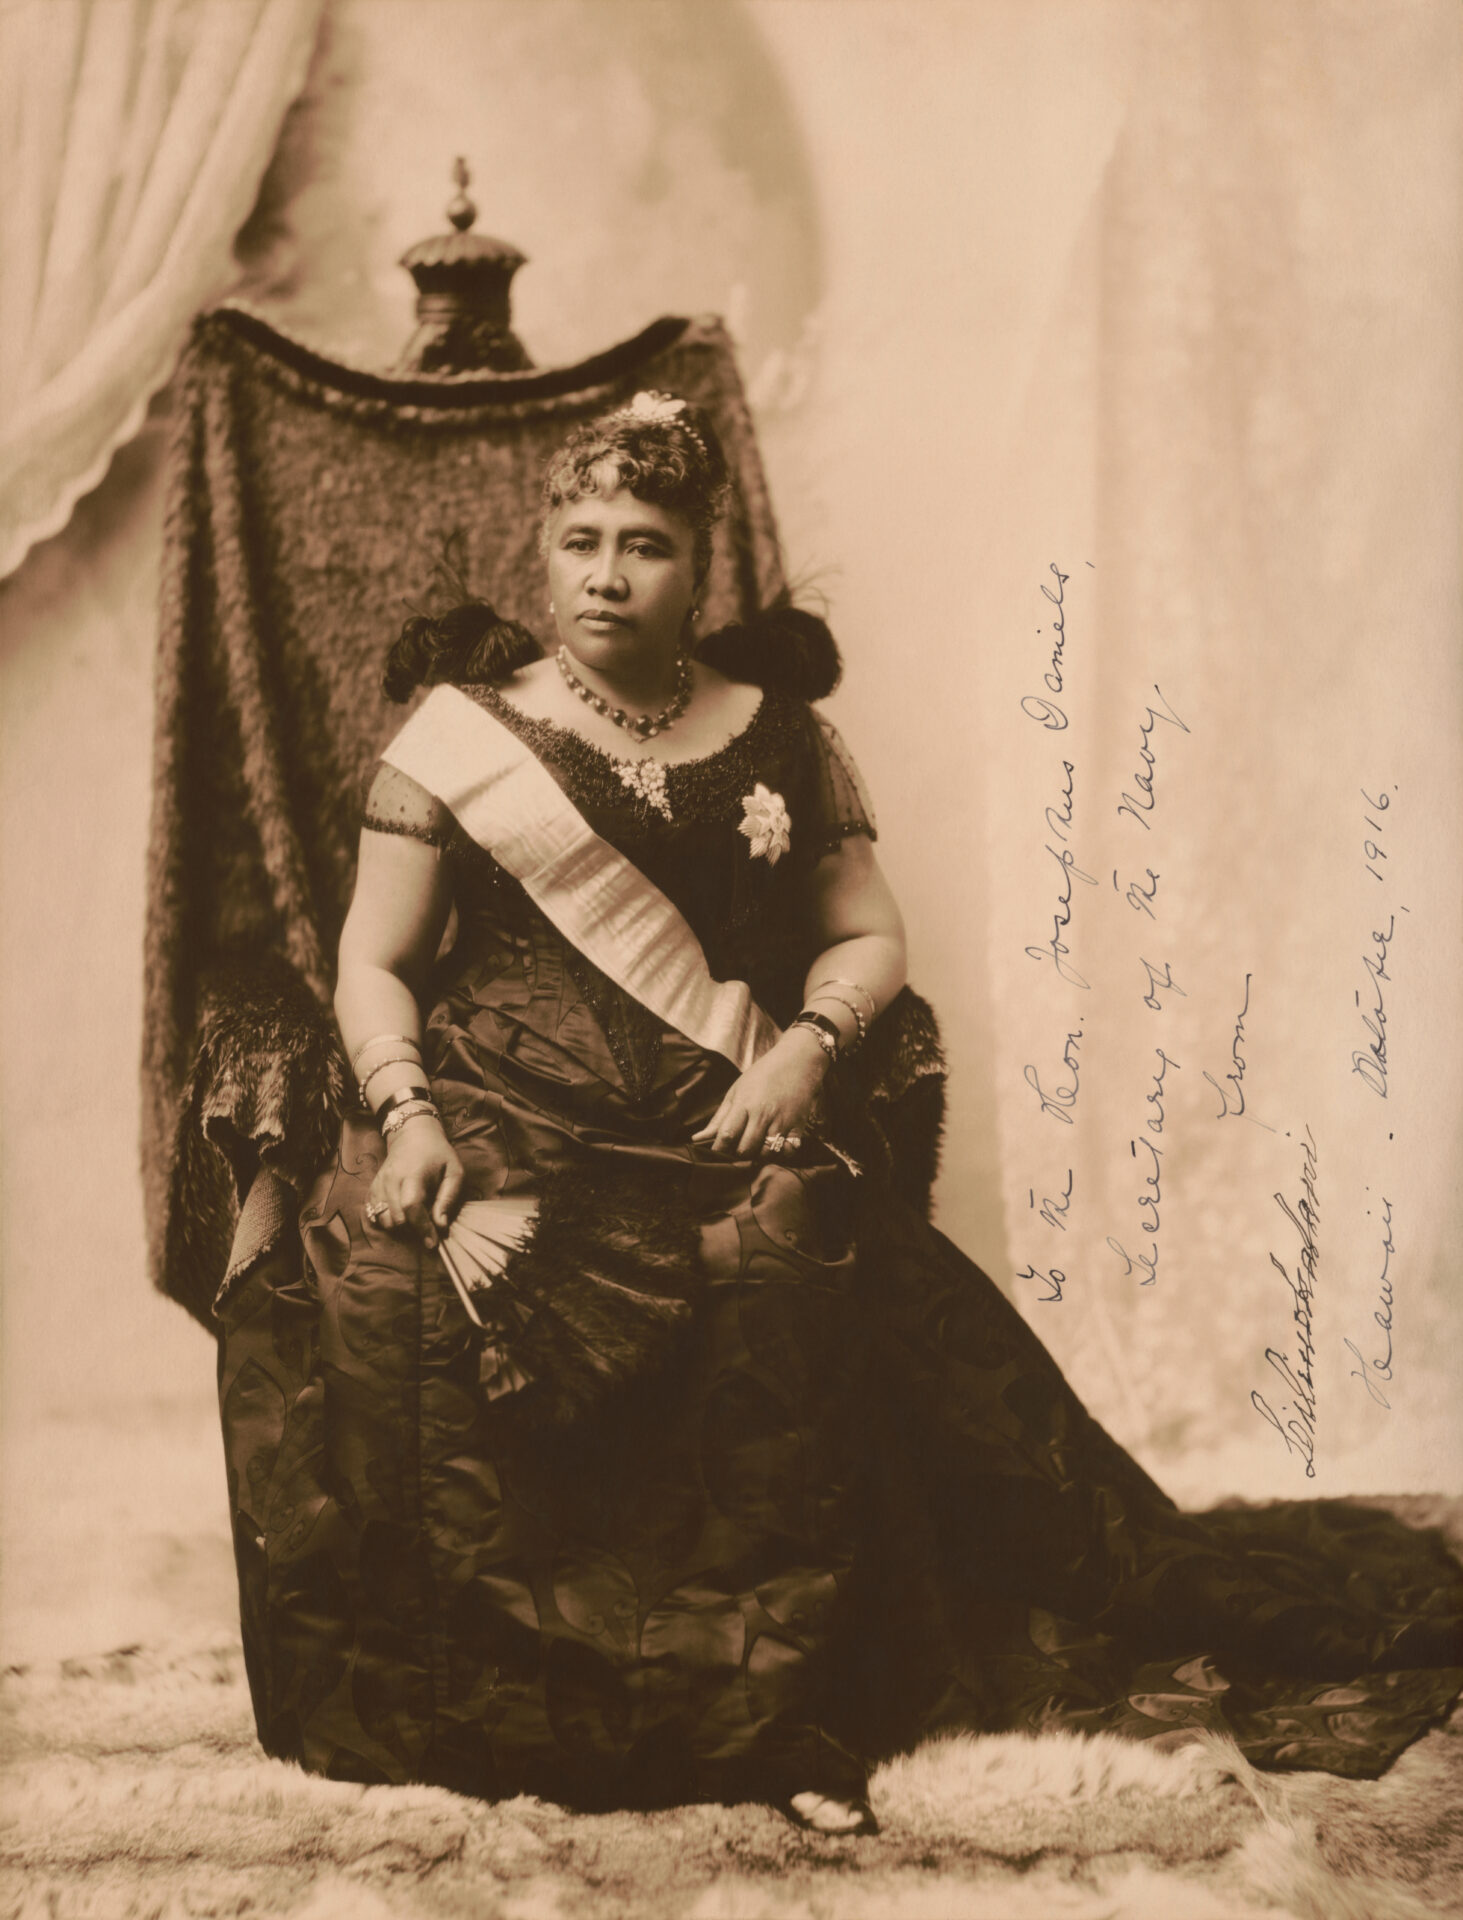 A sepia toned photograph of Queen Liliuokalani sitting on a throne.